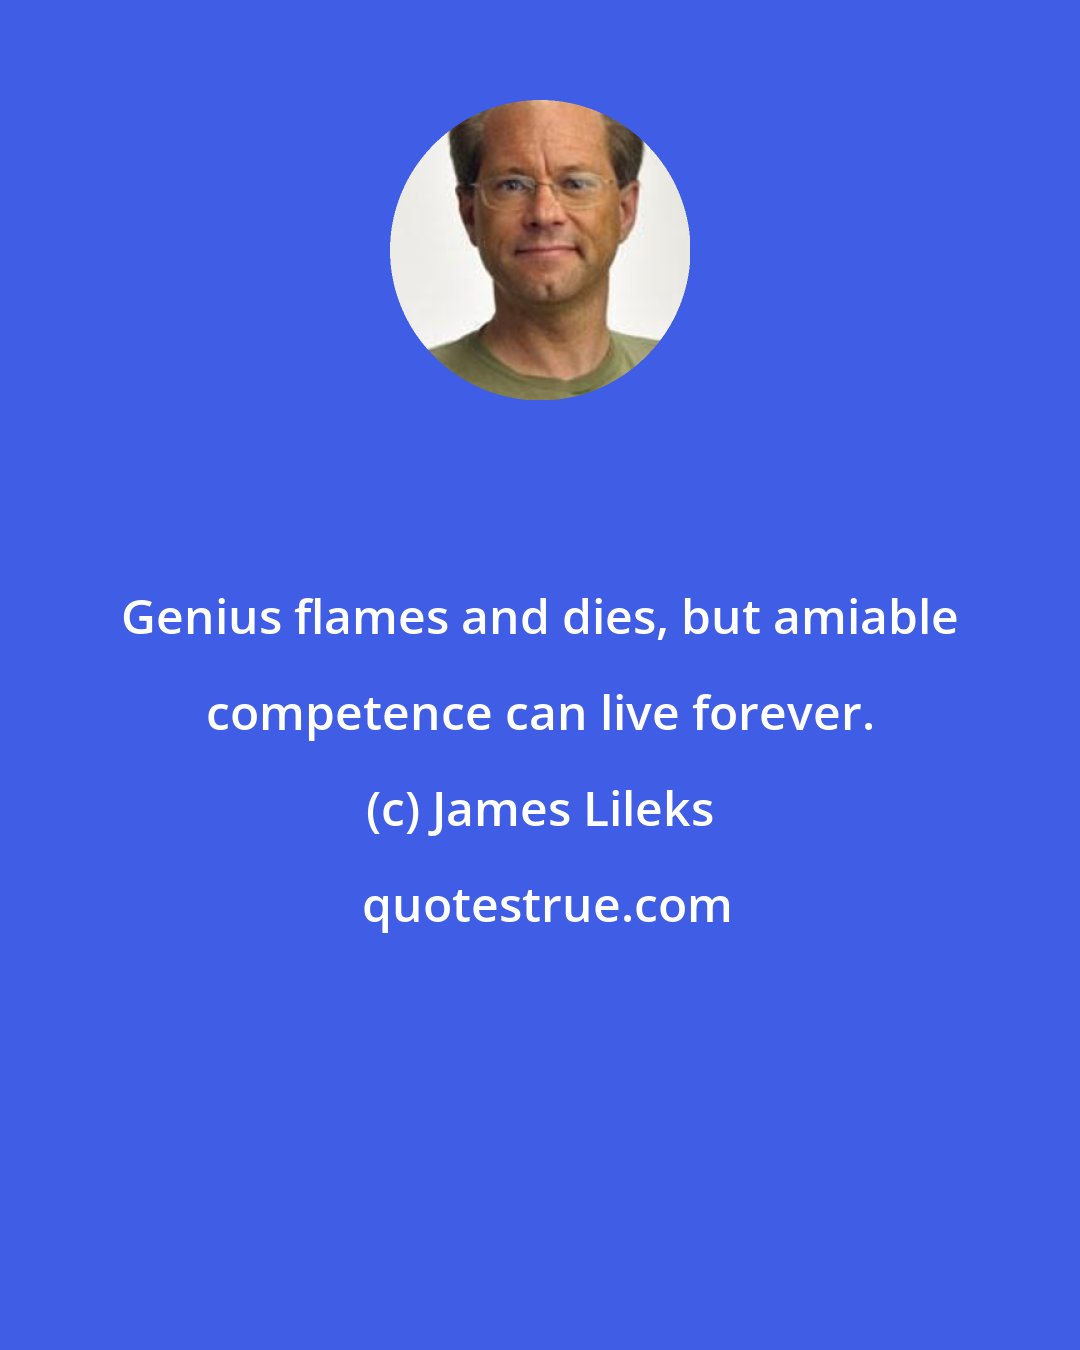 James Lileks: Genius flames and dies, but amiable competence can live forever.